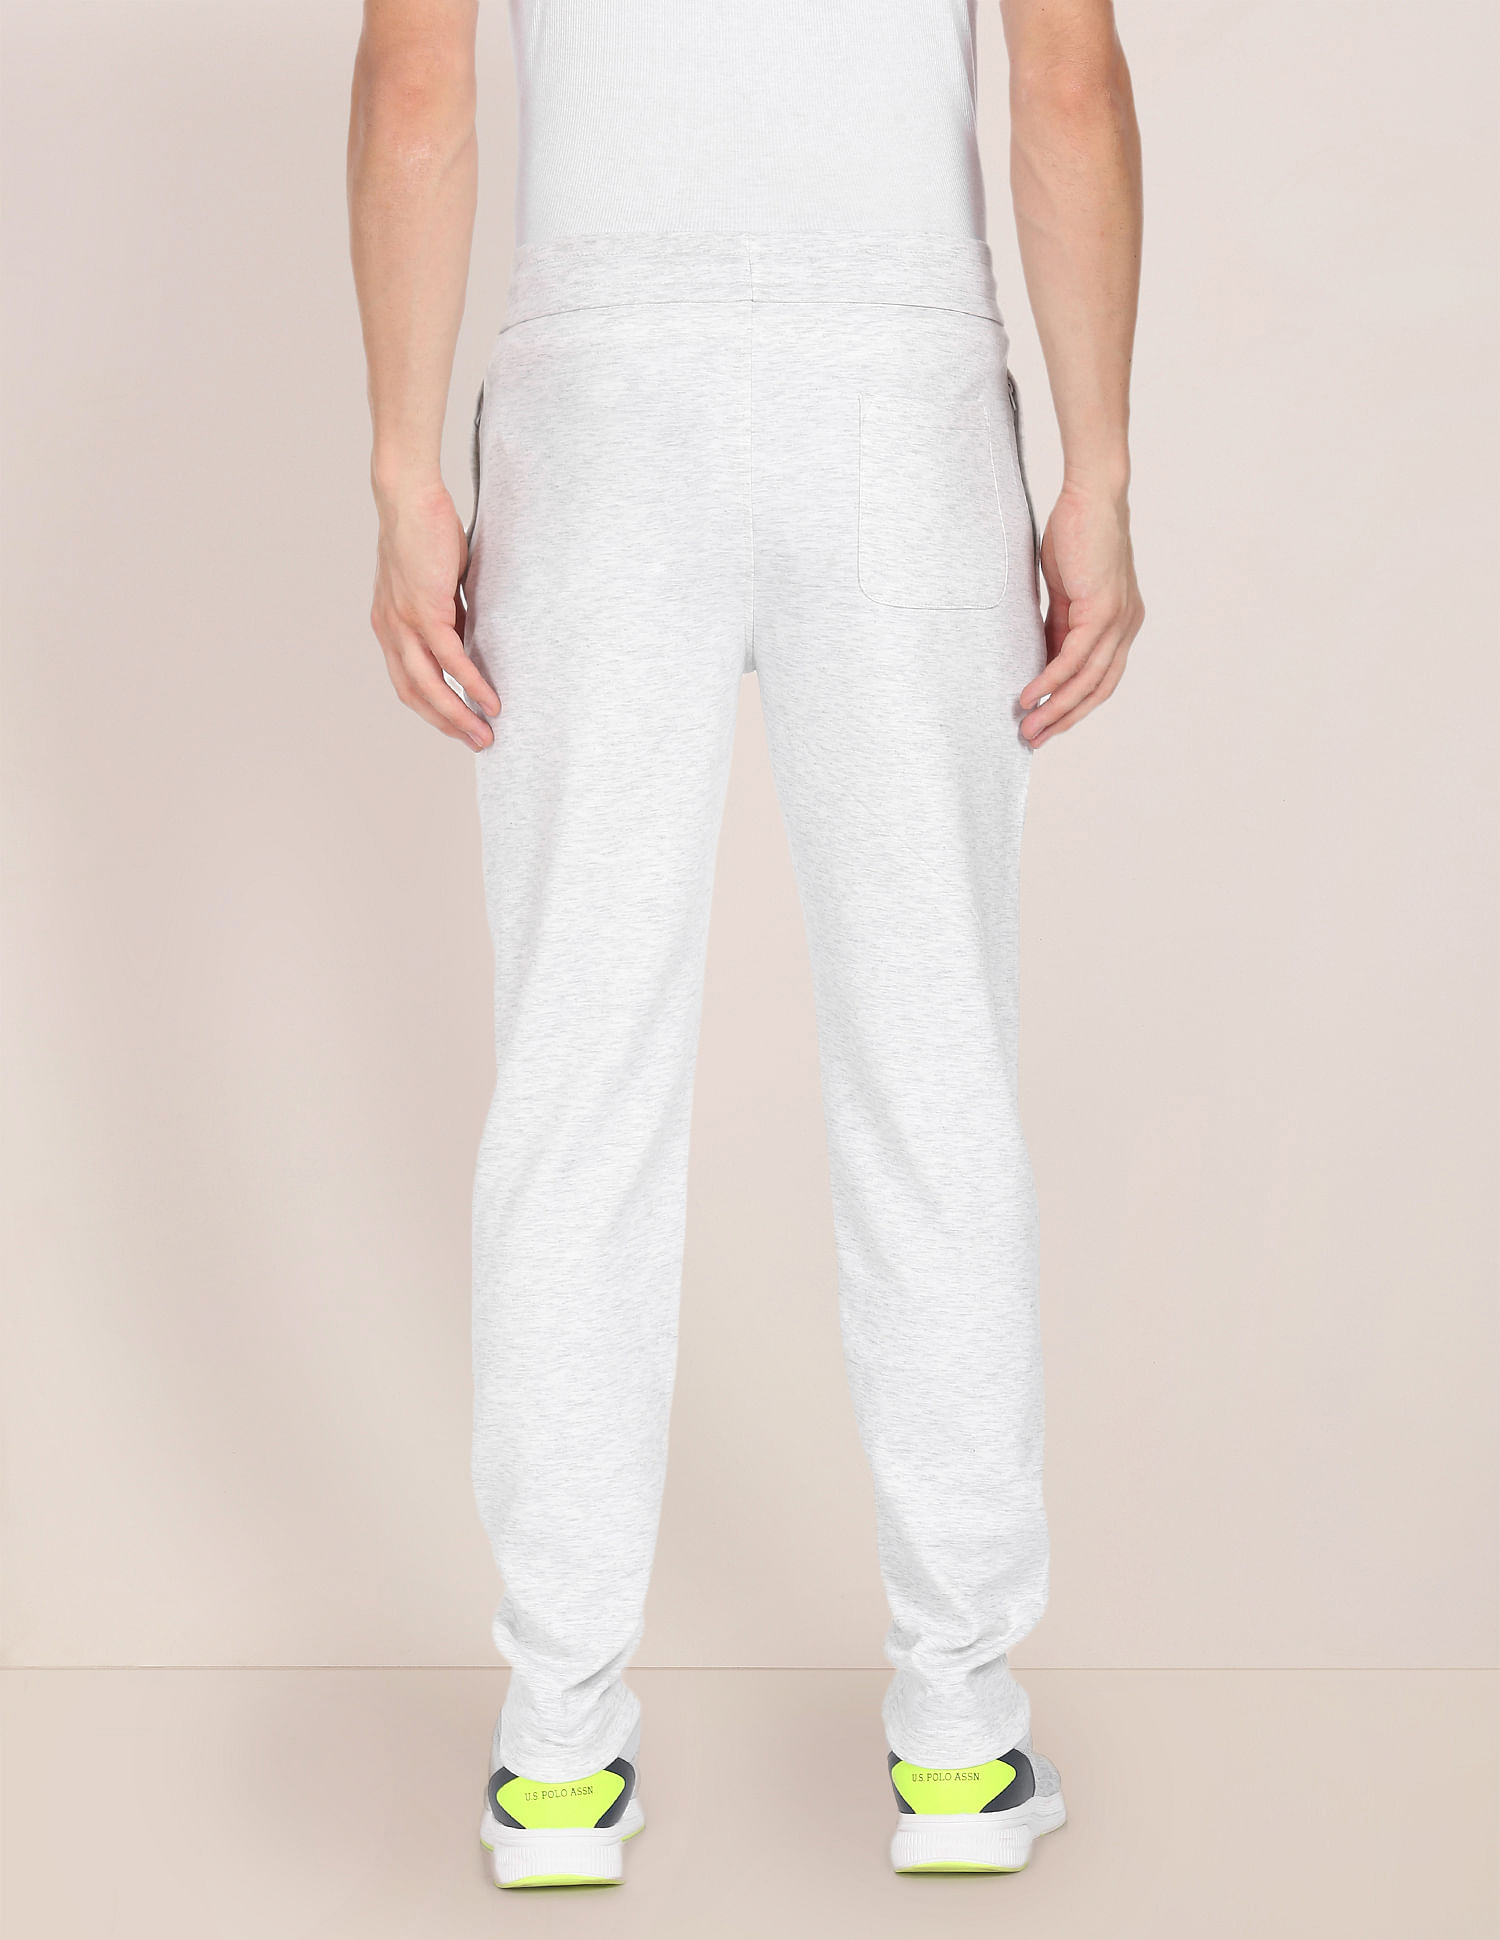 U.S. POLO ASSN. Mid Rise Textured Track Pants White 